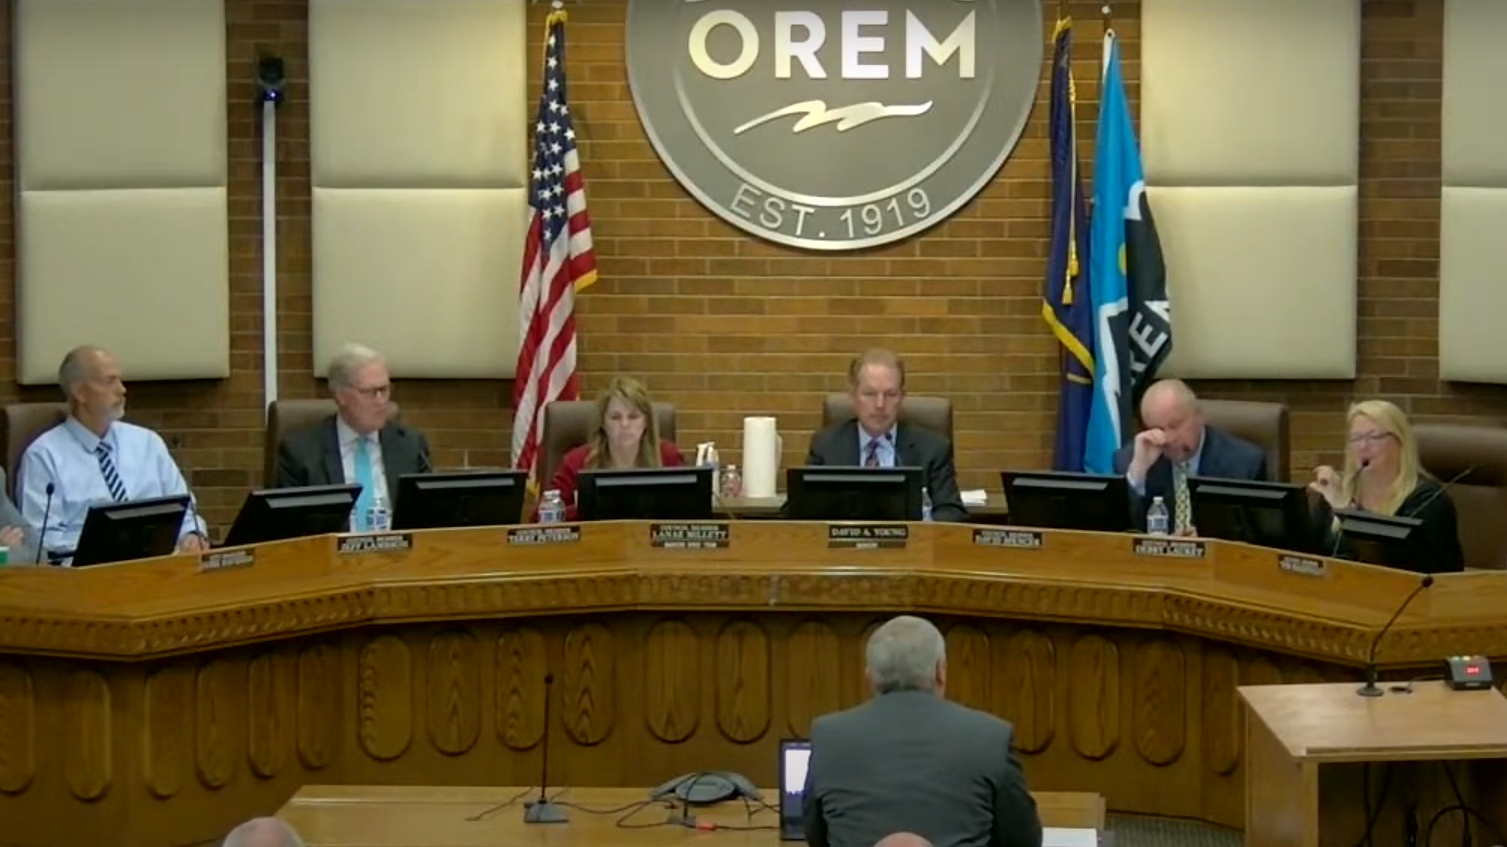 Orem city council members are pictured...